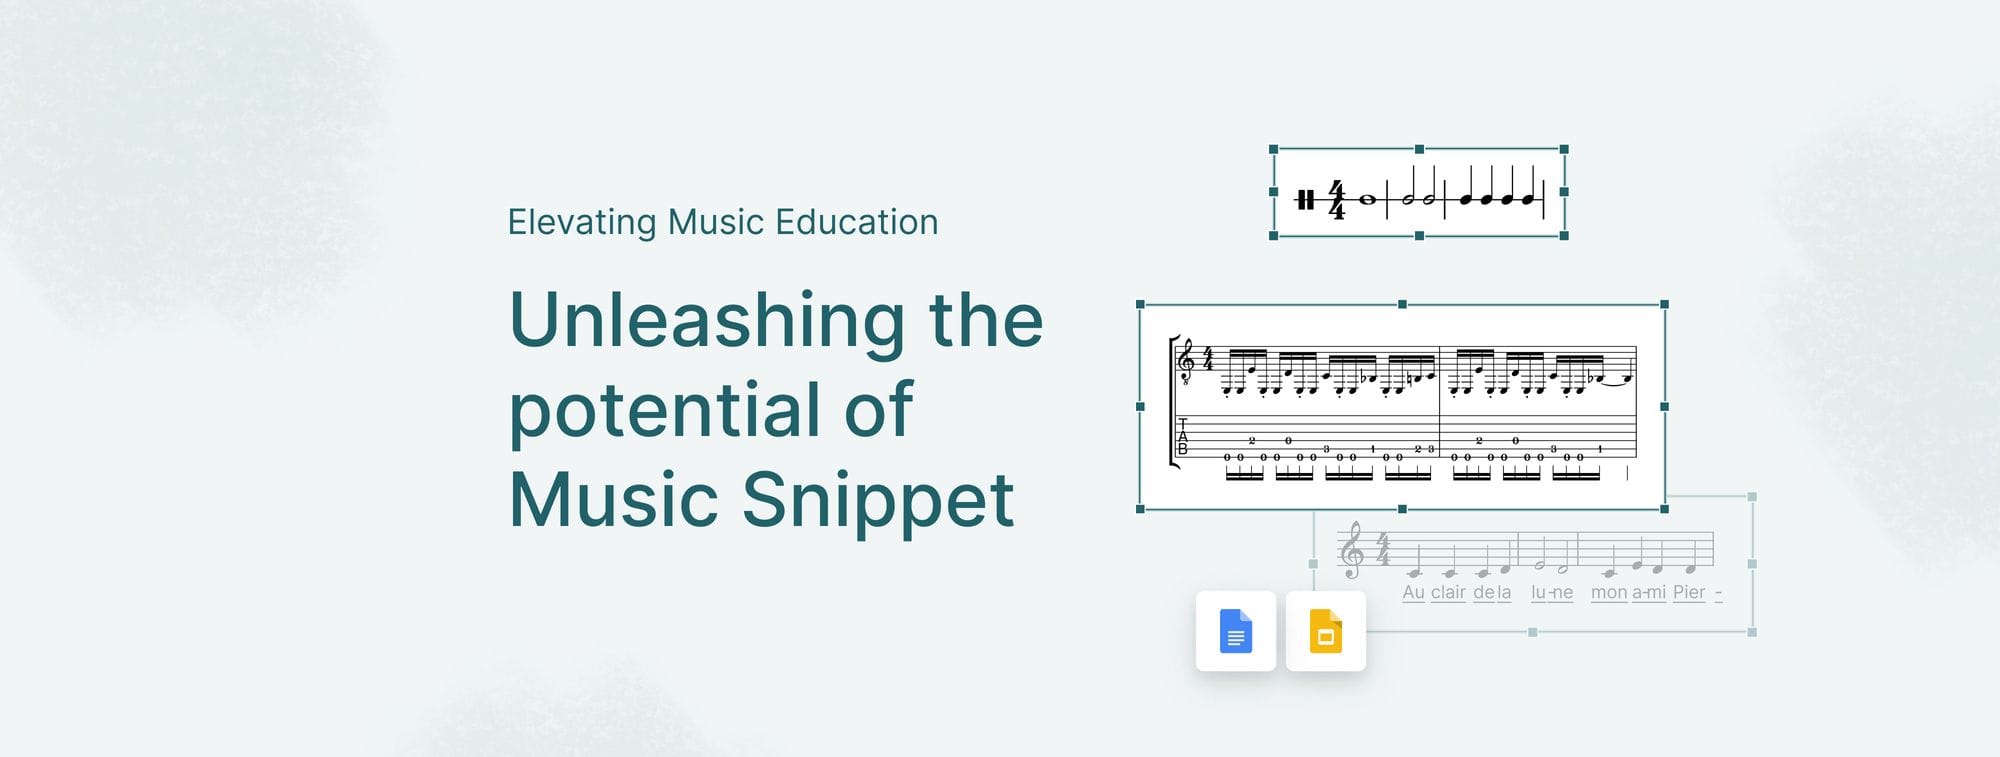 Elevating Music Education: Unleashing the potential of Music Snippet